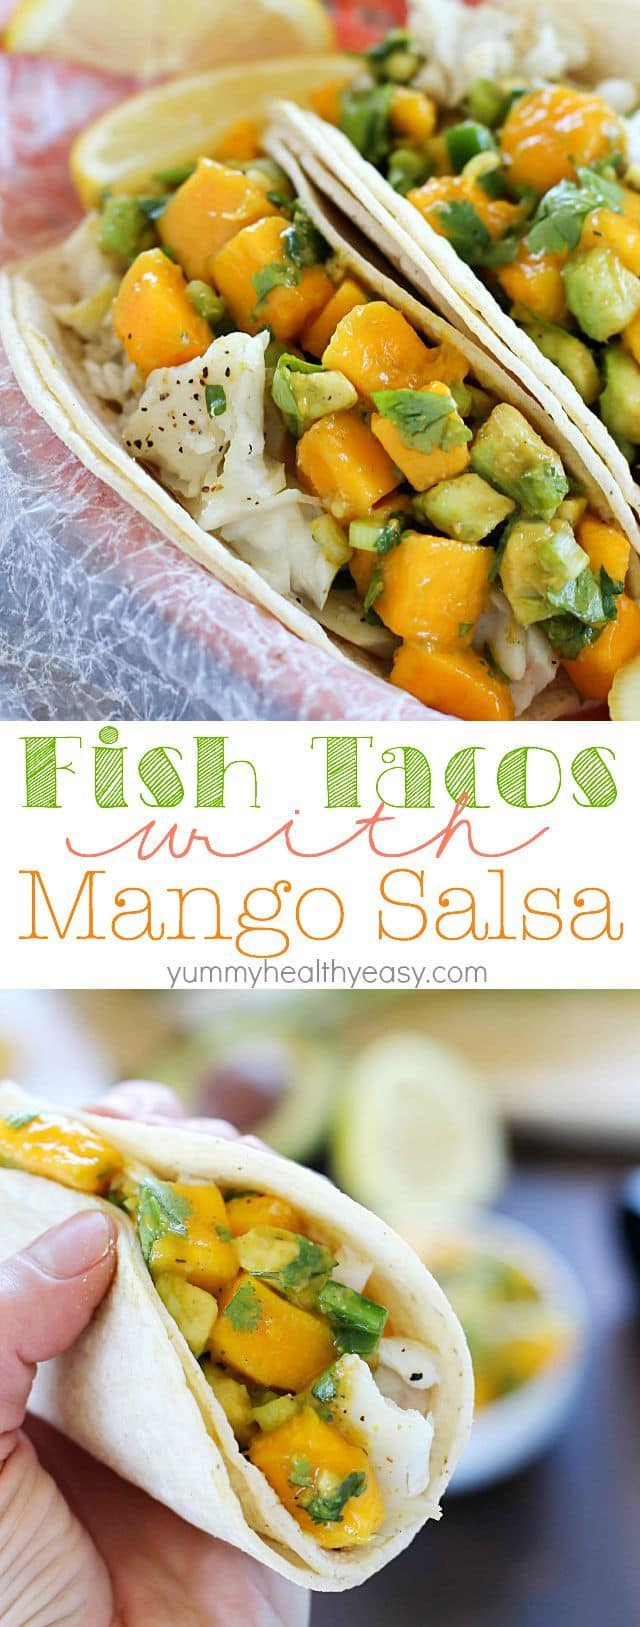 You will love these Fish Tacos with Mango Salsa! Corn tortillas filled with flaky white fish and topped with fresh mango and avocado salsa. Doesn't get better than that! #ad